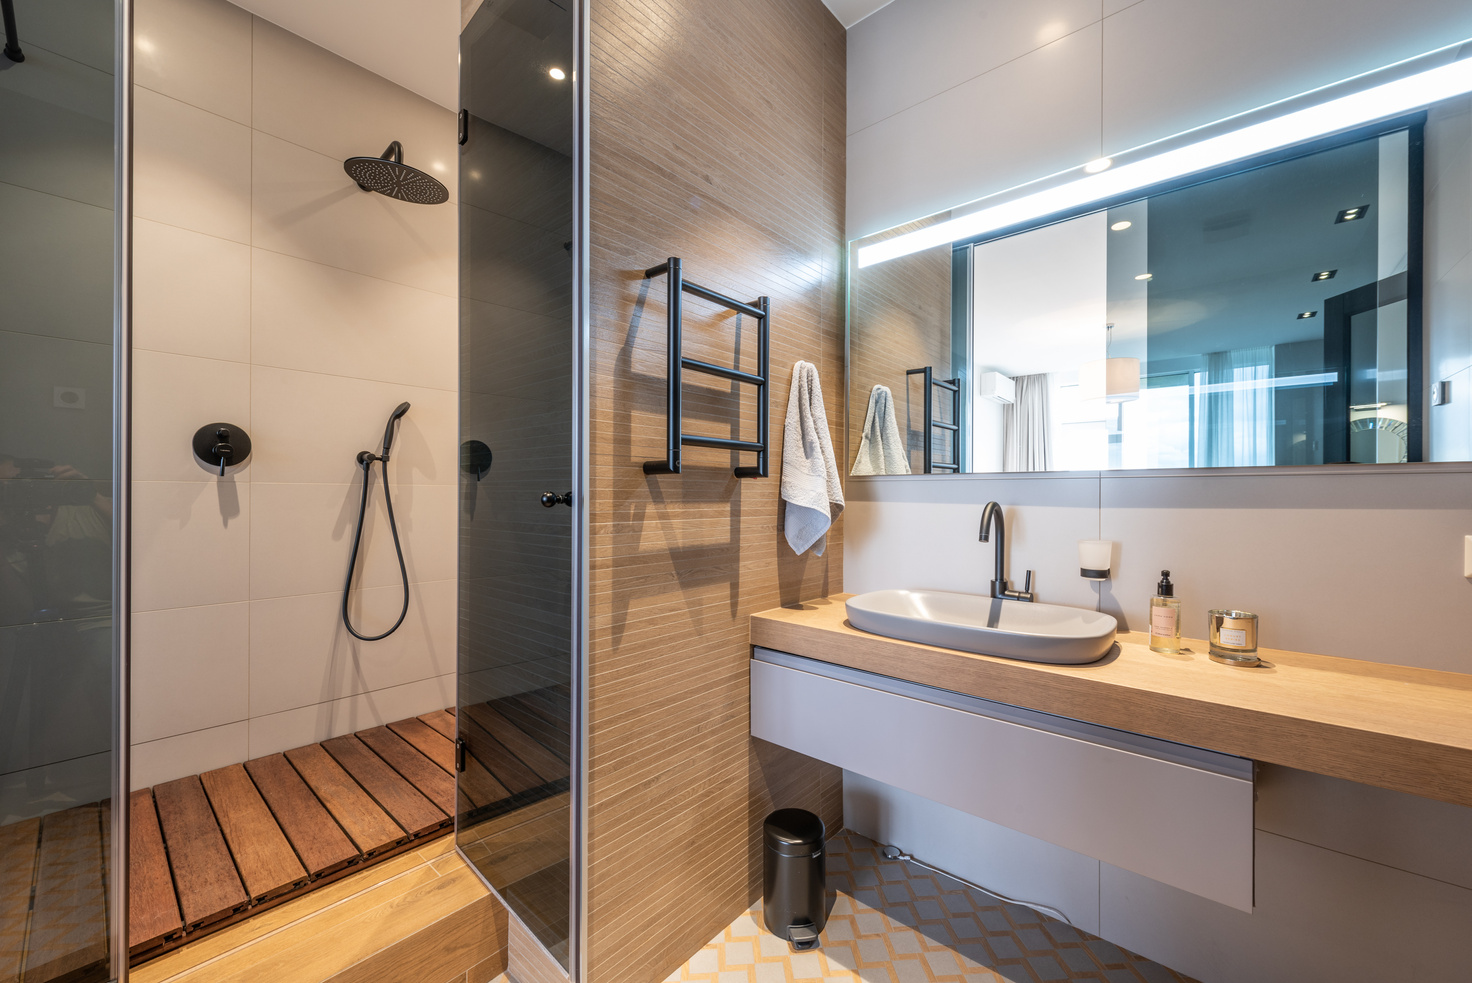 Contemporary bathroom with wooden details